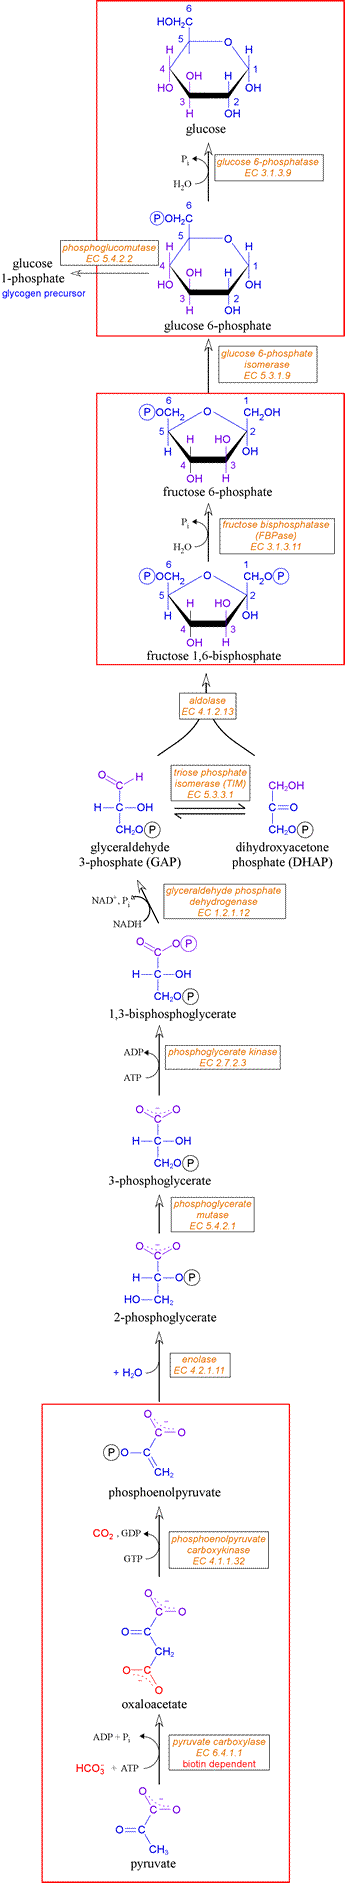 Diagram of gluconeogenic pathway with reactions, structures of intermediates, and enzyme names